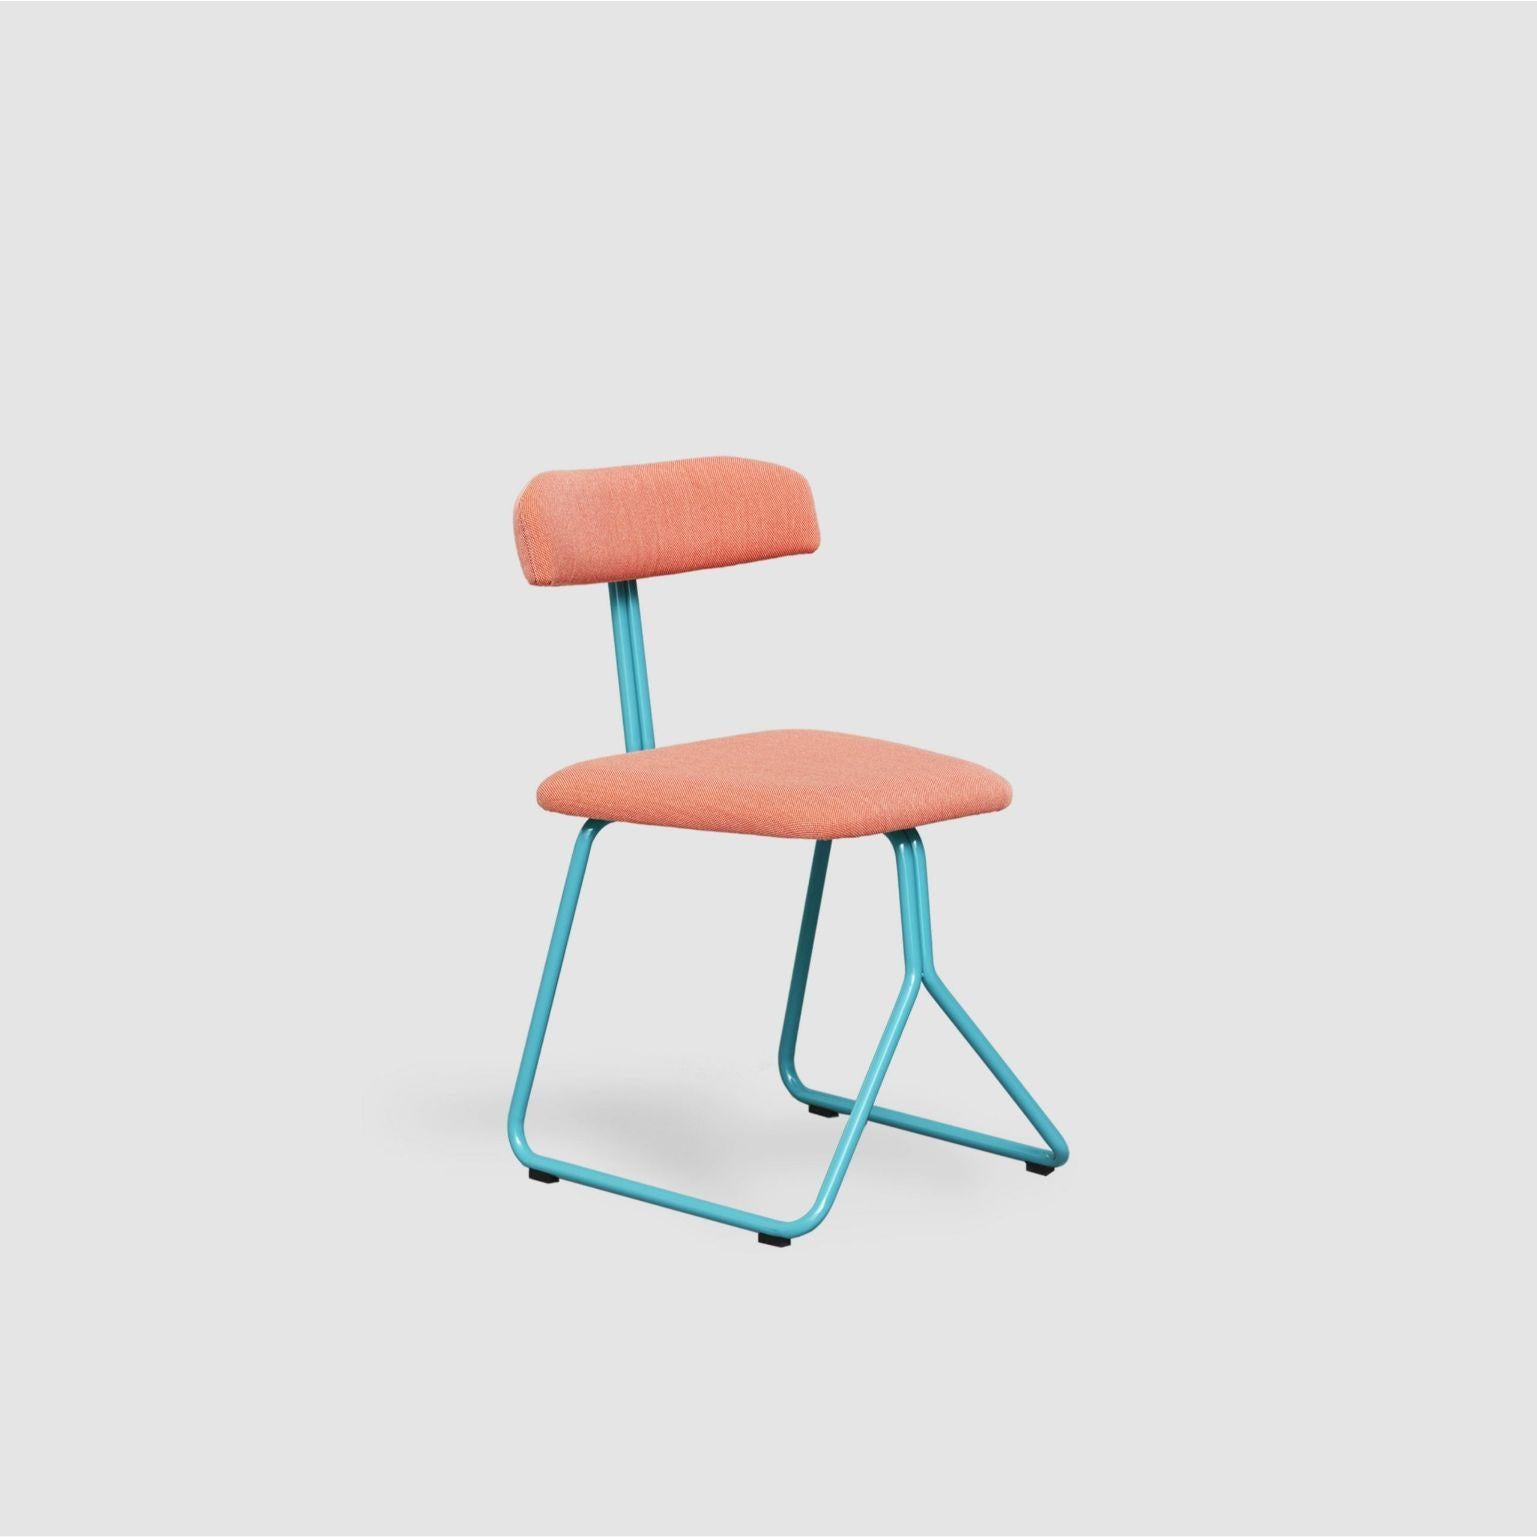 Contemporary A Set of Rider Stool & Chair by Pavel Vetrov